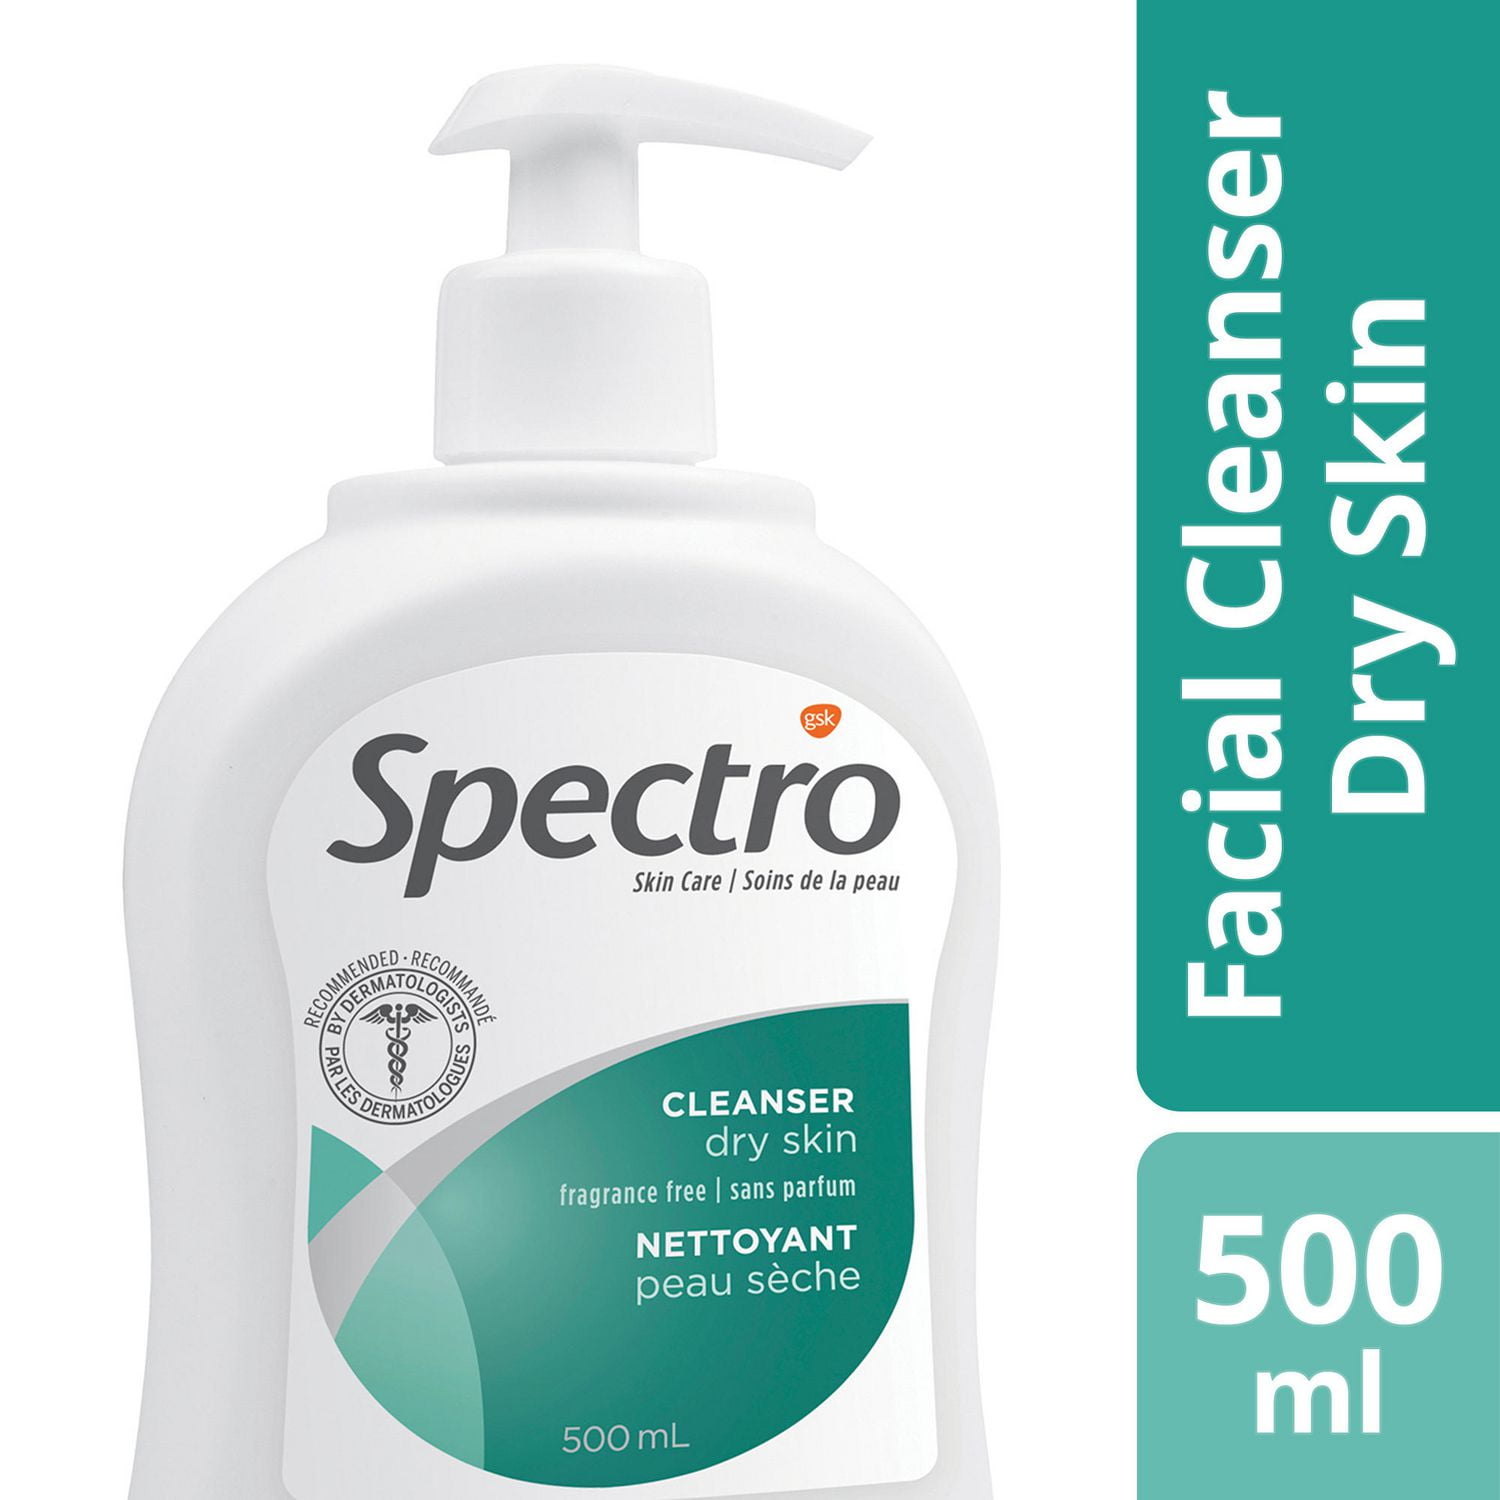 3x Spectro Jel Cleanser Face Wash For Dry Skin Fragrance Free 500ml Canada